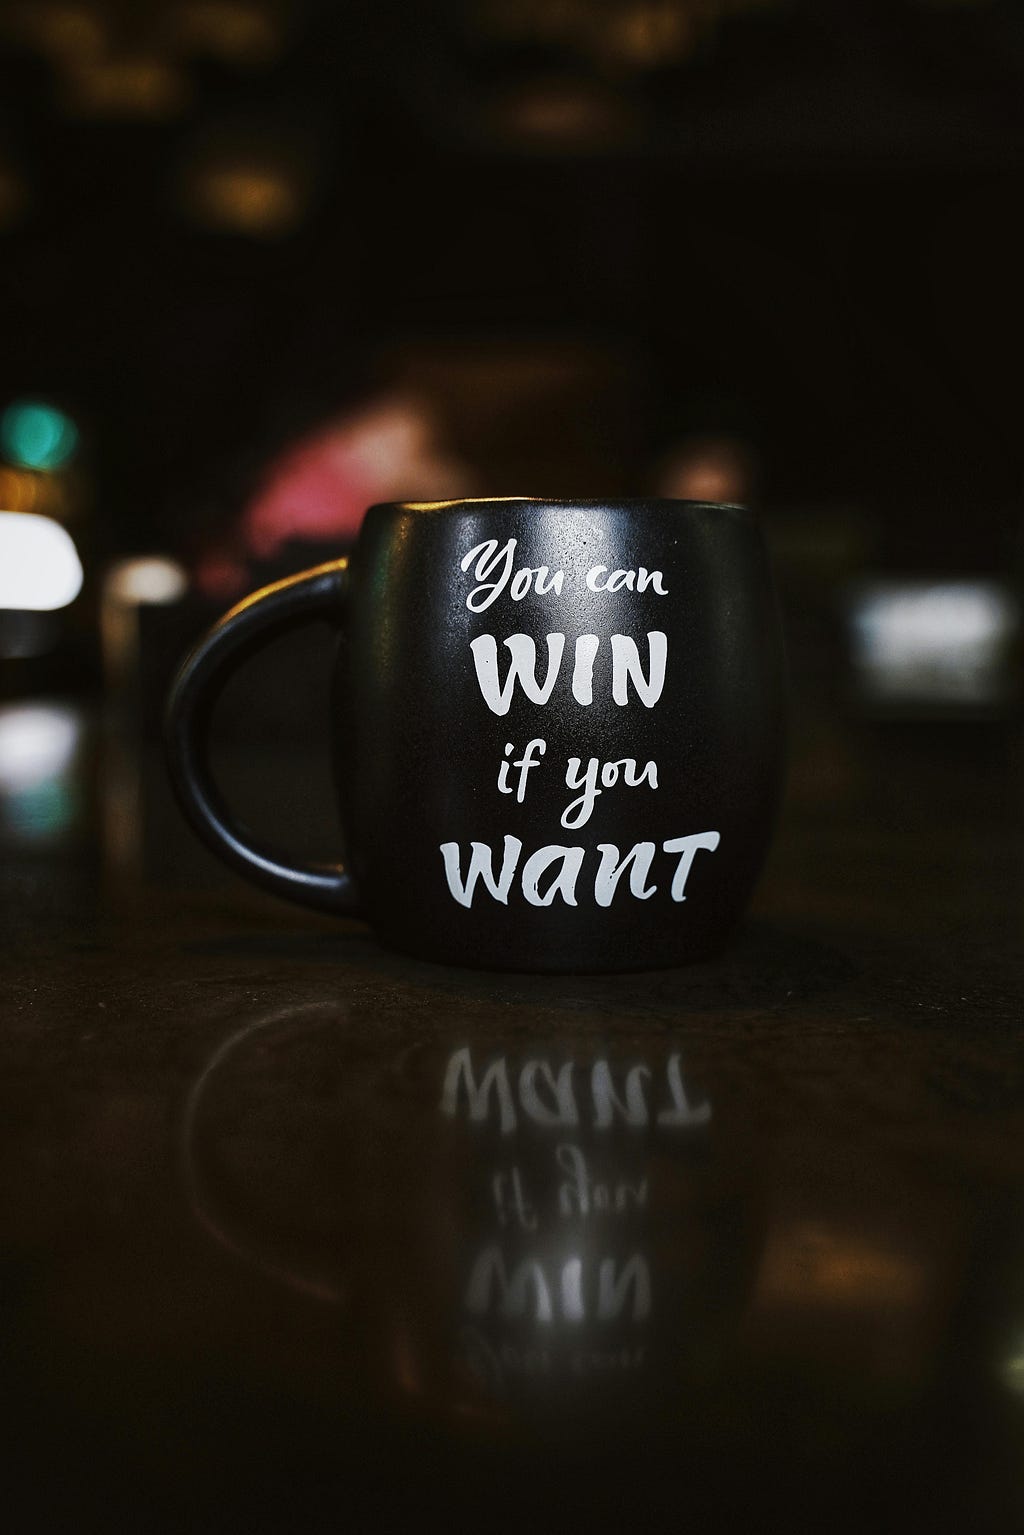 Close up photo of black mug that says “you can win if you want” in white font